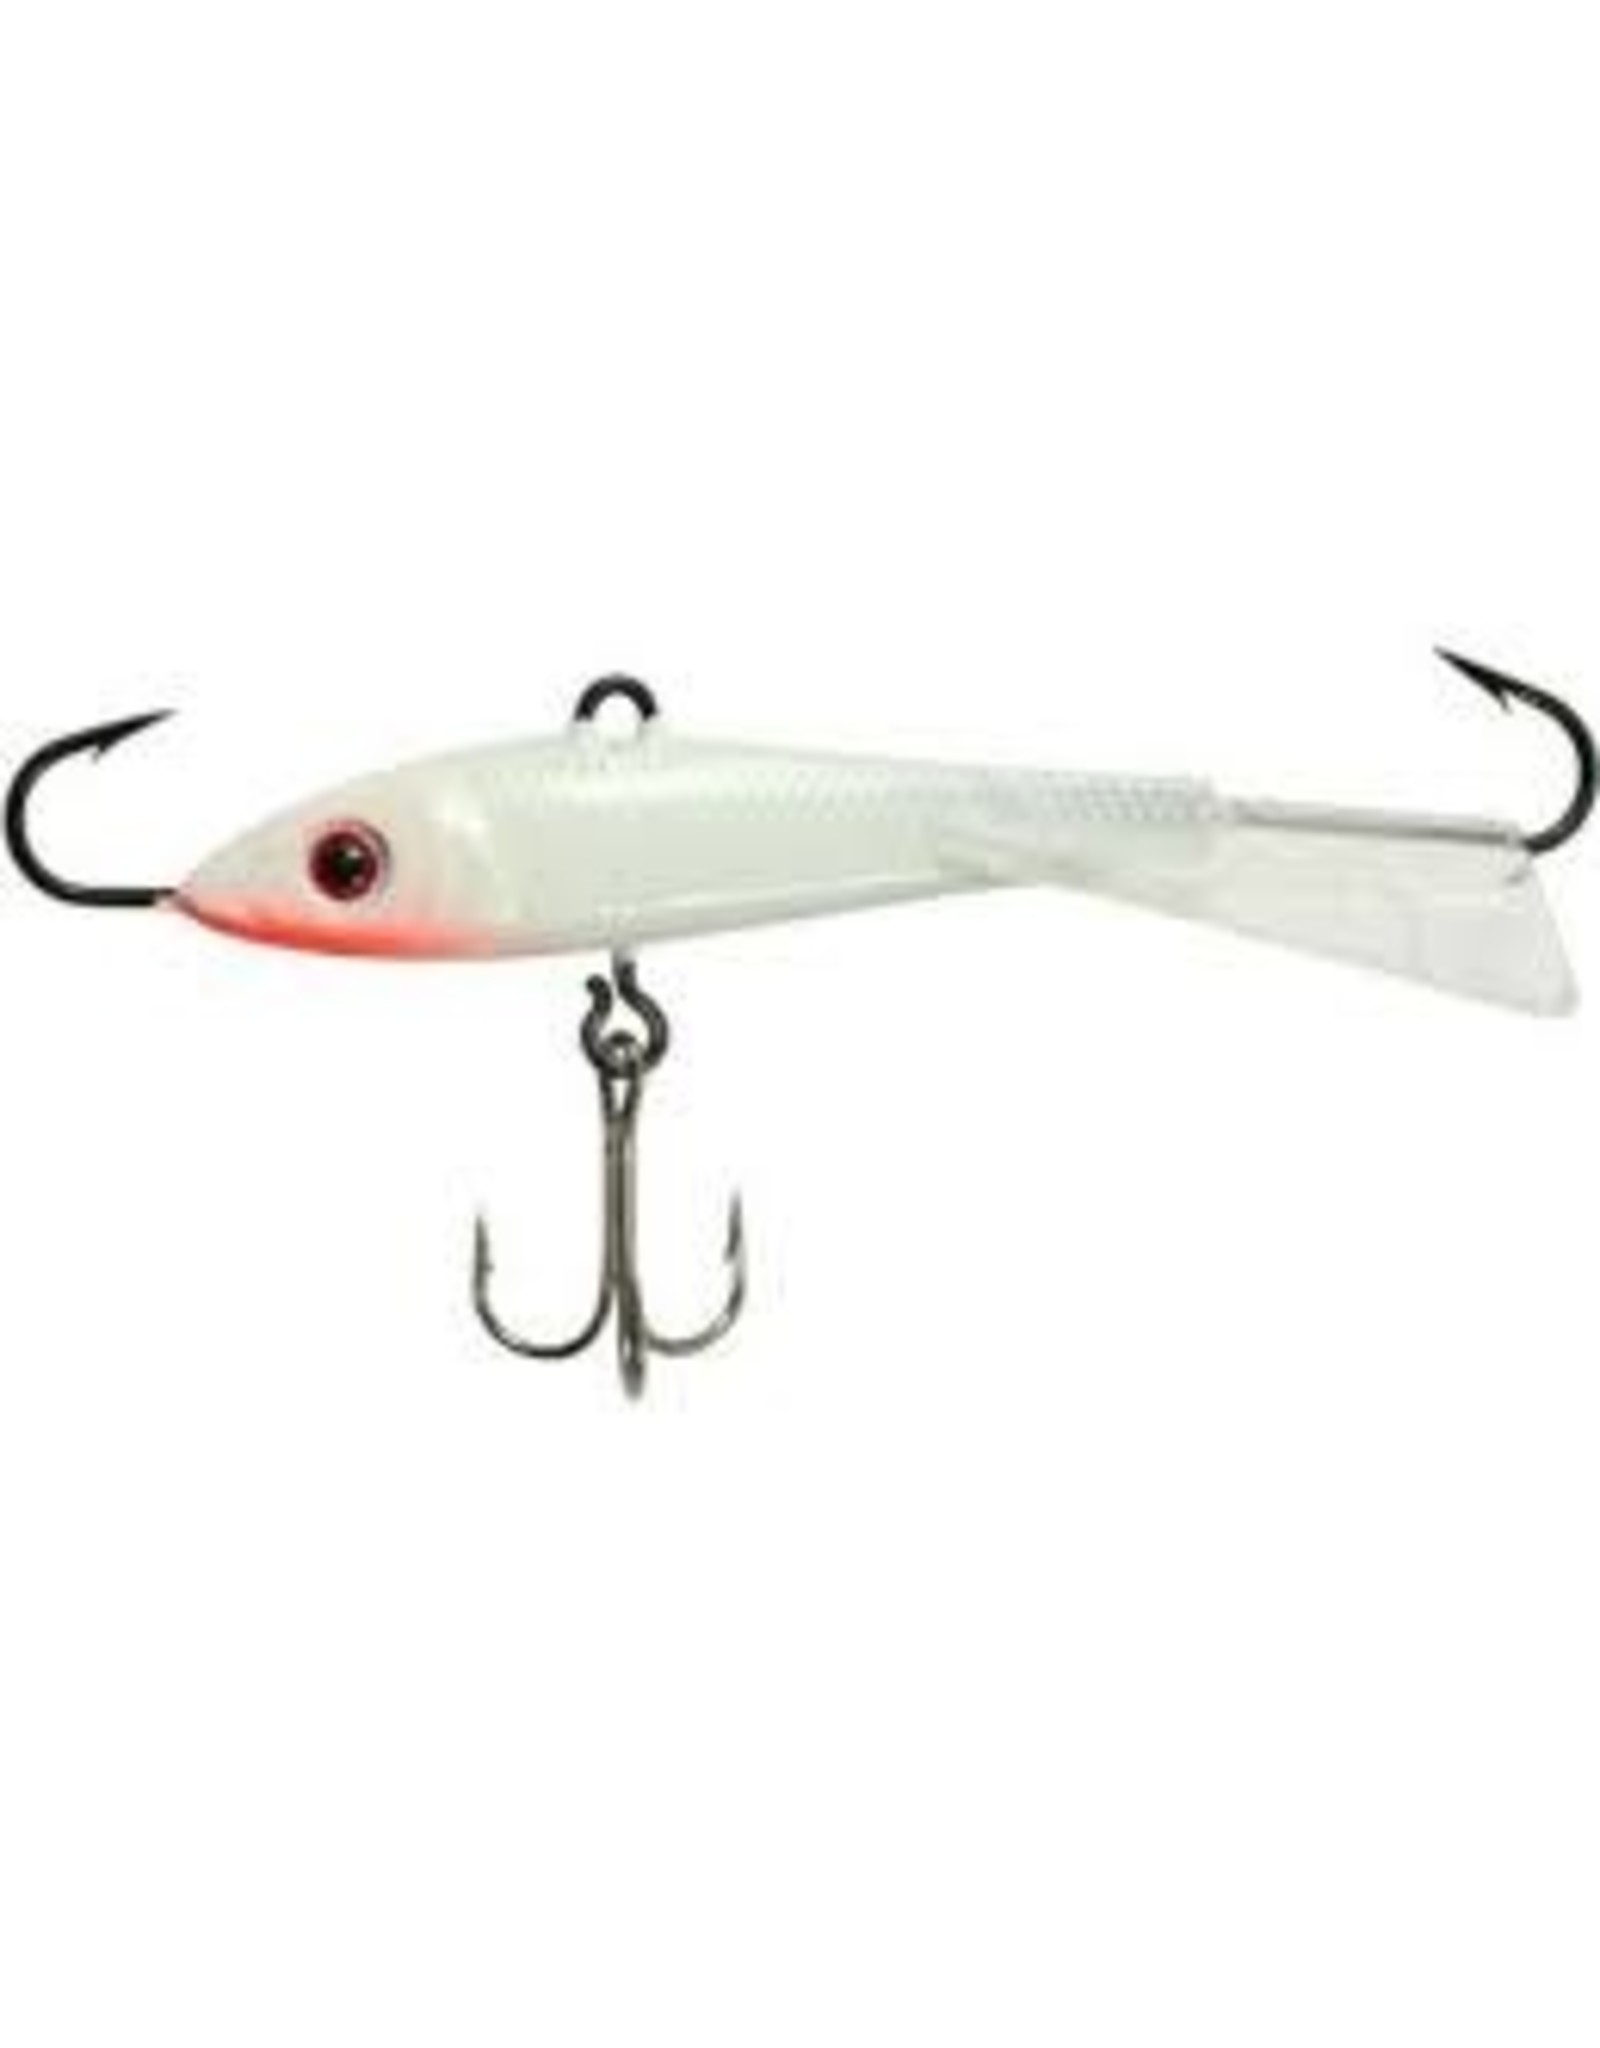 Northland Fishing Tackle Northland Puppet Minnow Darting Jig *GLOW* White 5/16oz